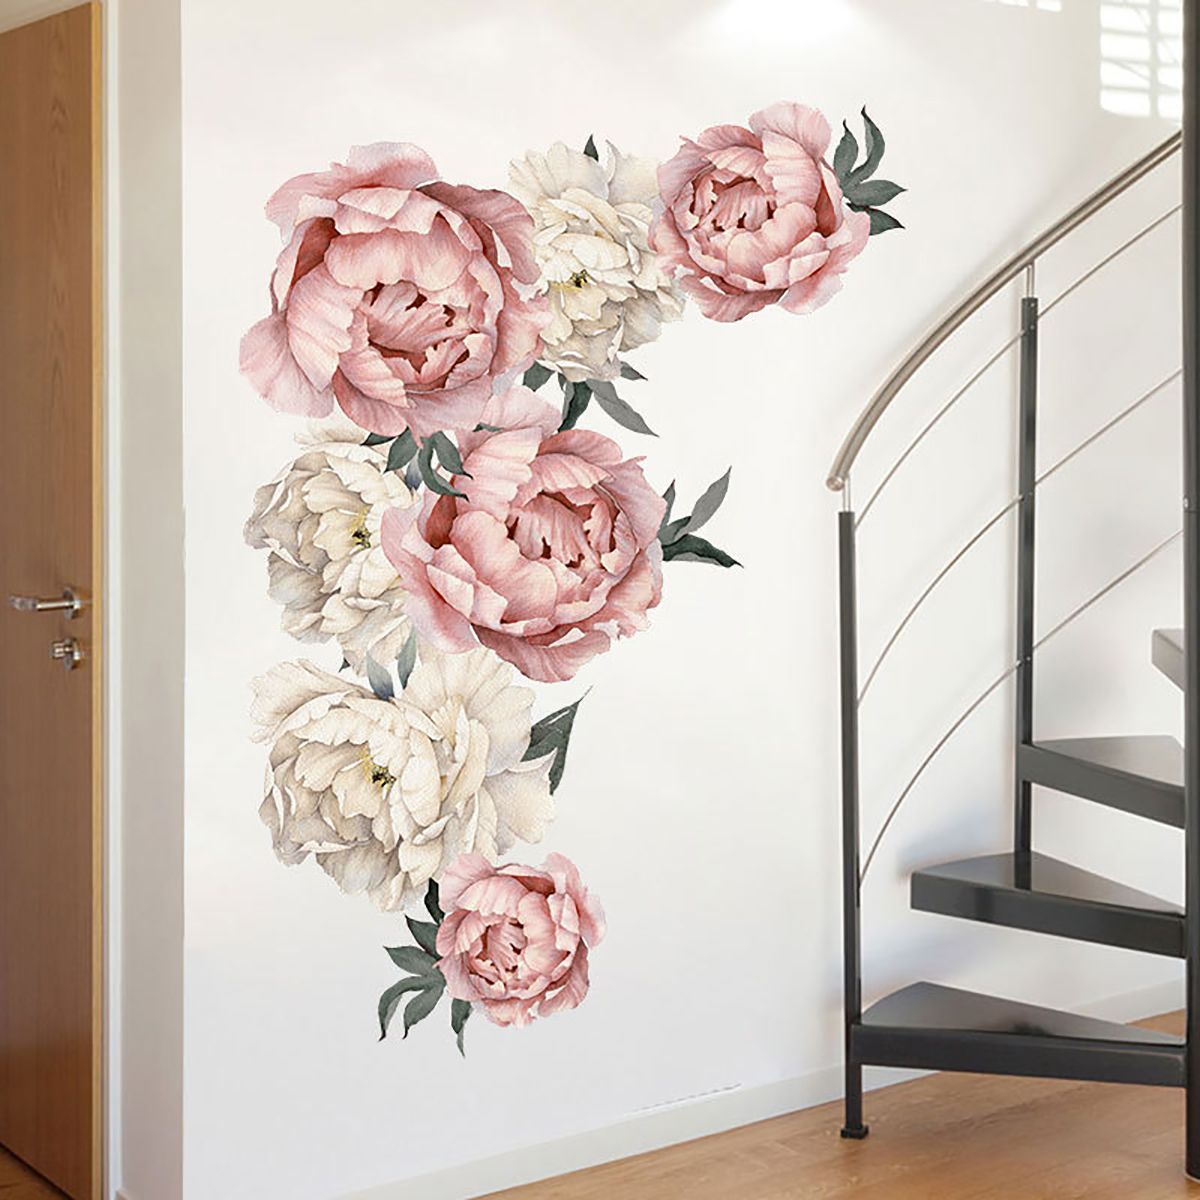 Romantic-Peony-Flowers-Wall-Sticker-Art-Decal-Background-Living-Room-Home-Decor-1652669